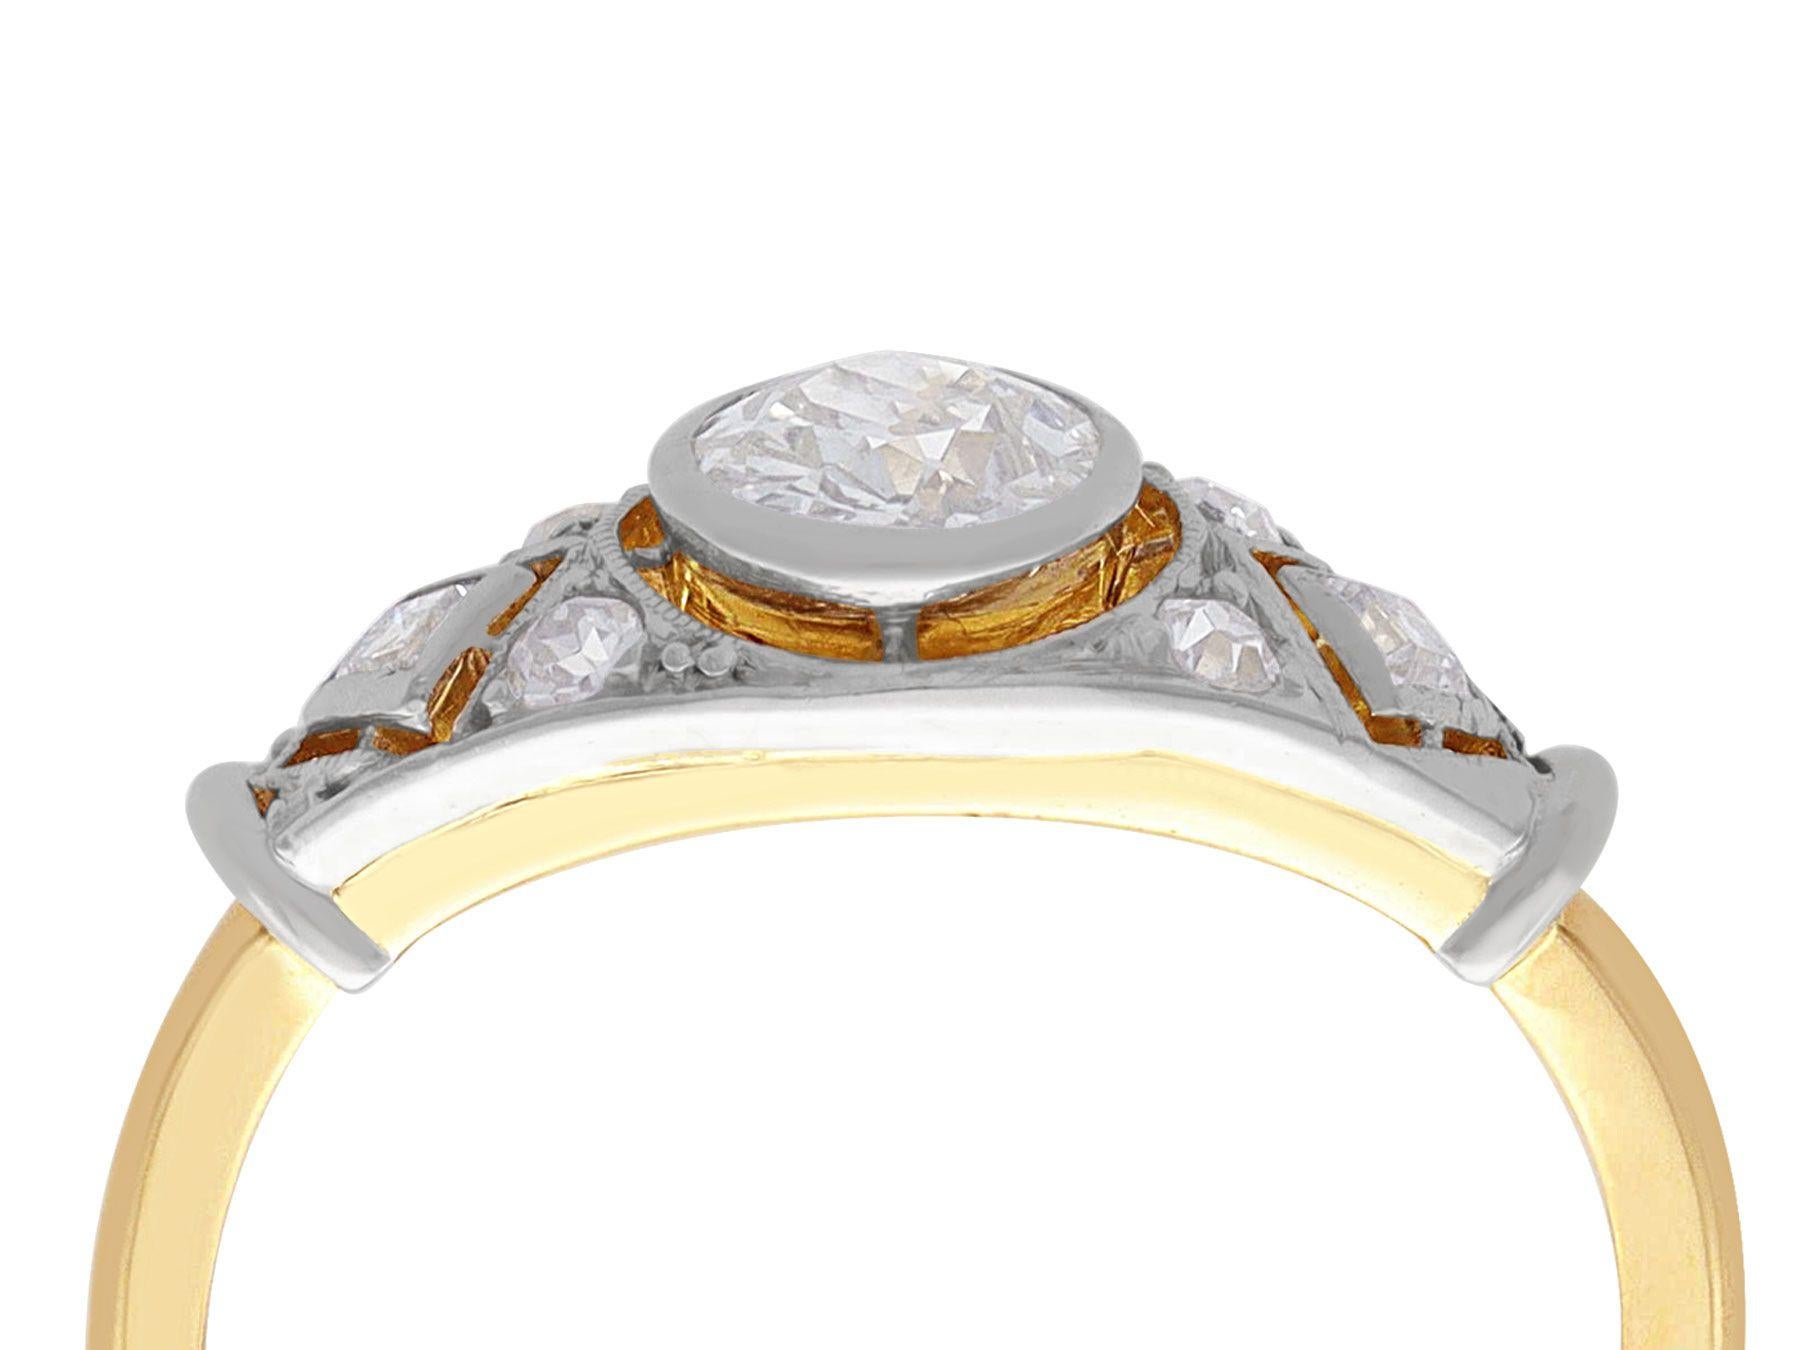 A fine and impressive 0.83 carat diamond, 18 karat yellow gold and platinum solitaire ring; part of our diamond engagement ring collections.

This stunning, fine and impressive 1920s solitaire diamond ring has been crafted in 18k yellow gold with a